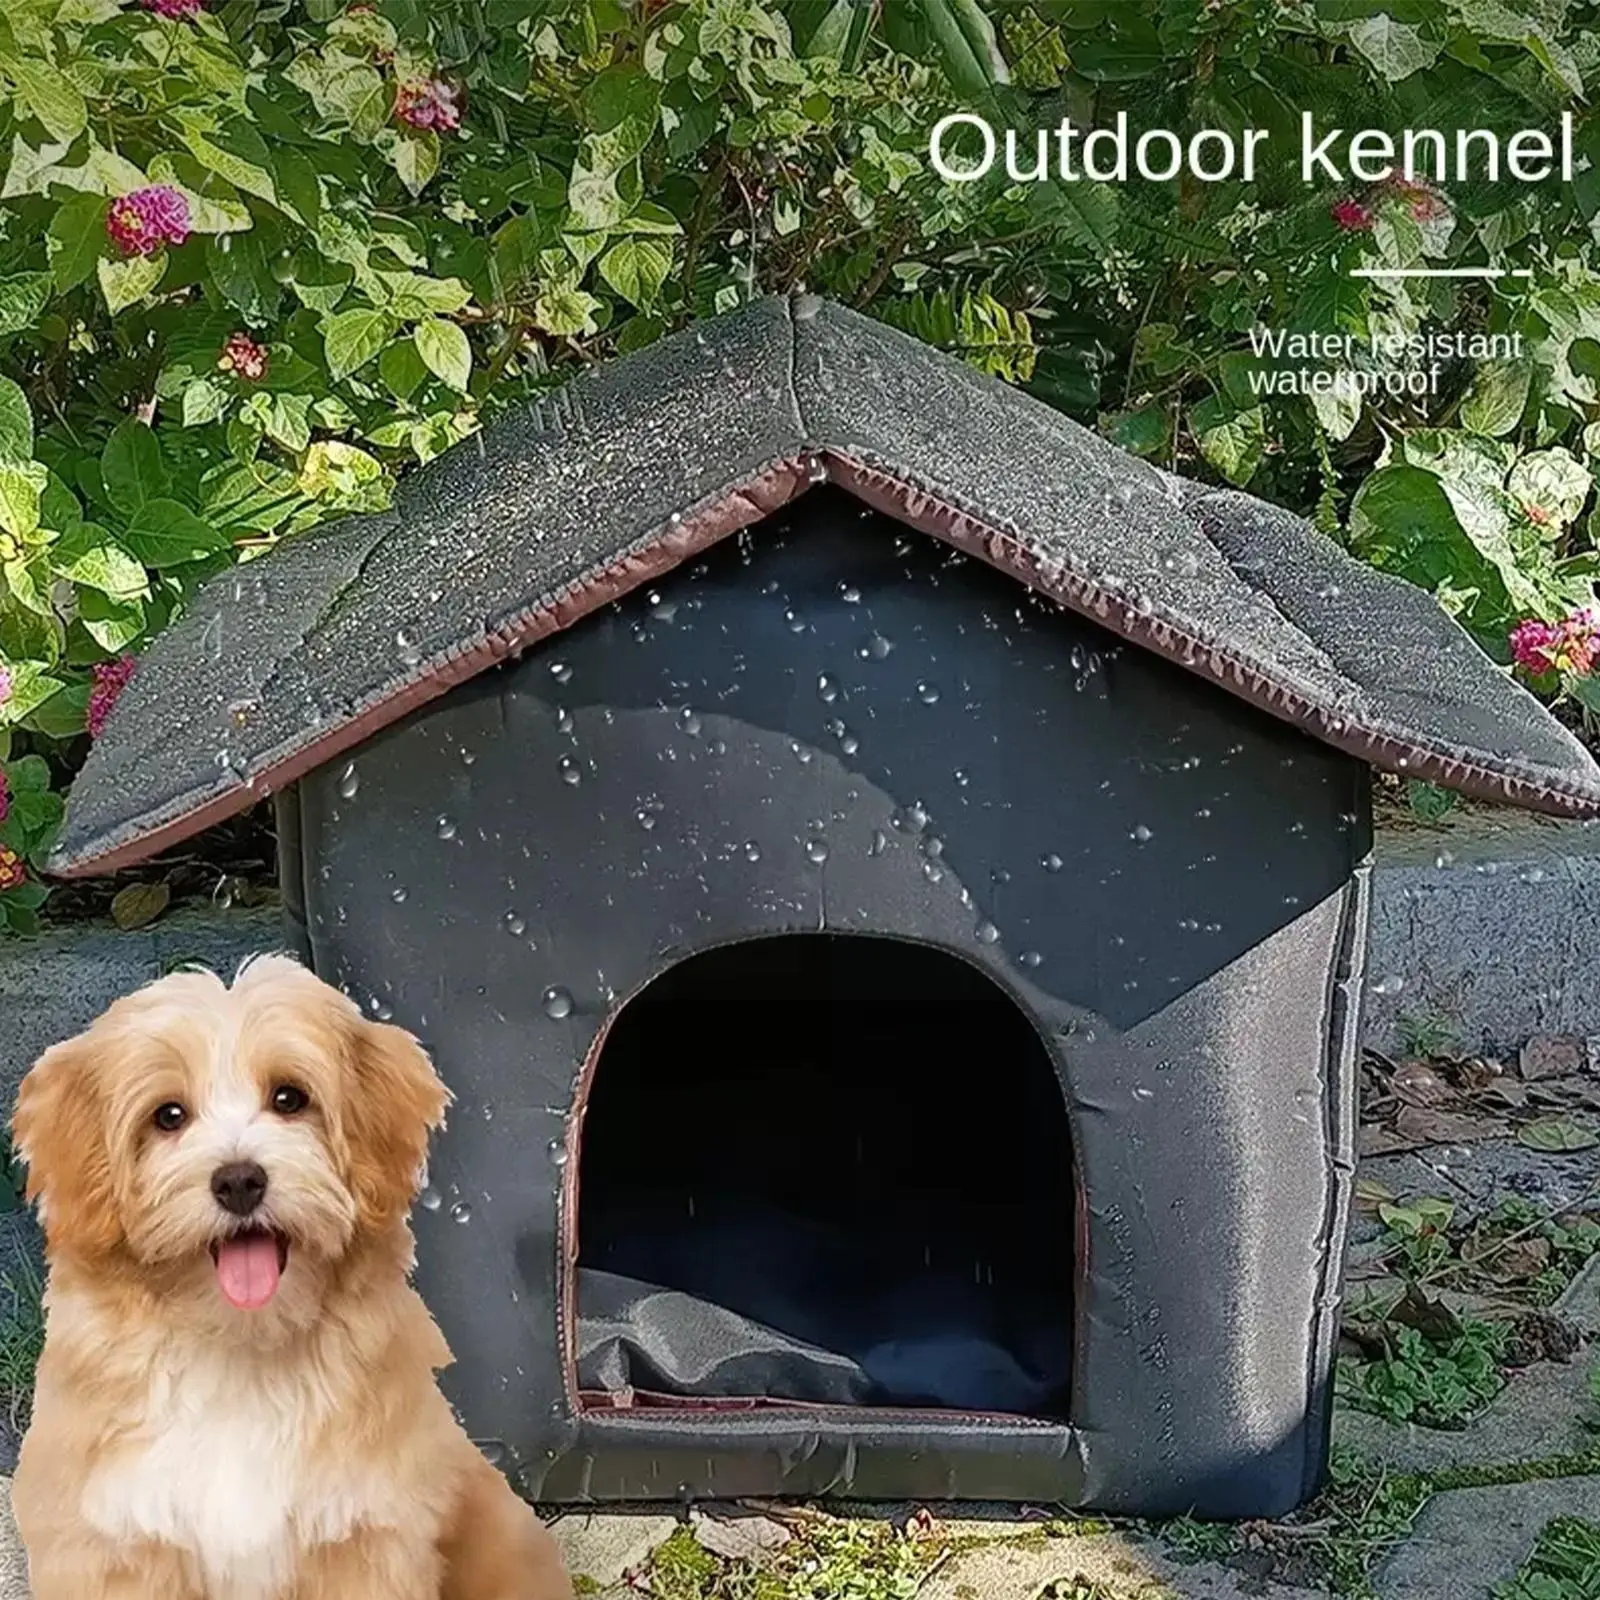 

S House Waterproof Outdoor Keep Warm Pet Cave Beds Nest Stray Shelter Foldable Washable For Kitten Puppy Pets Su V7i4